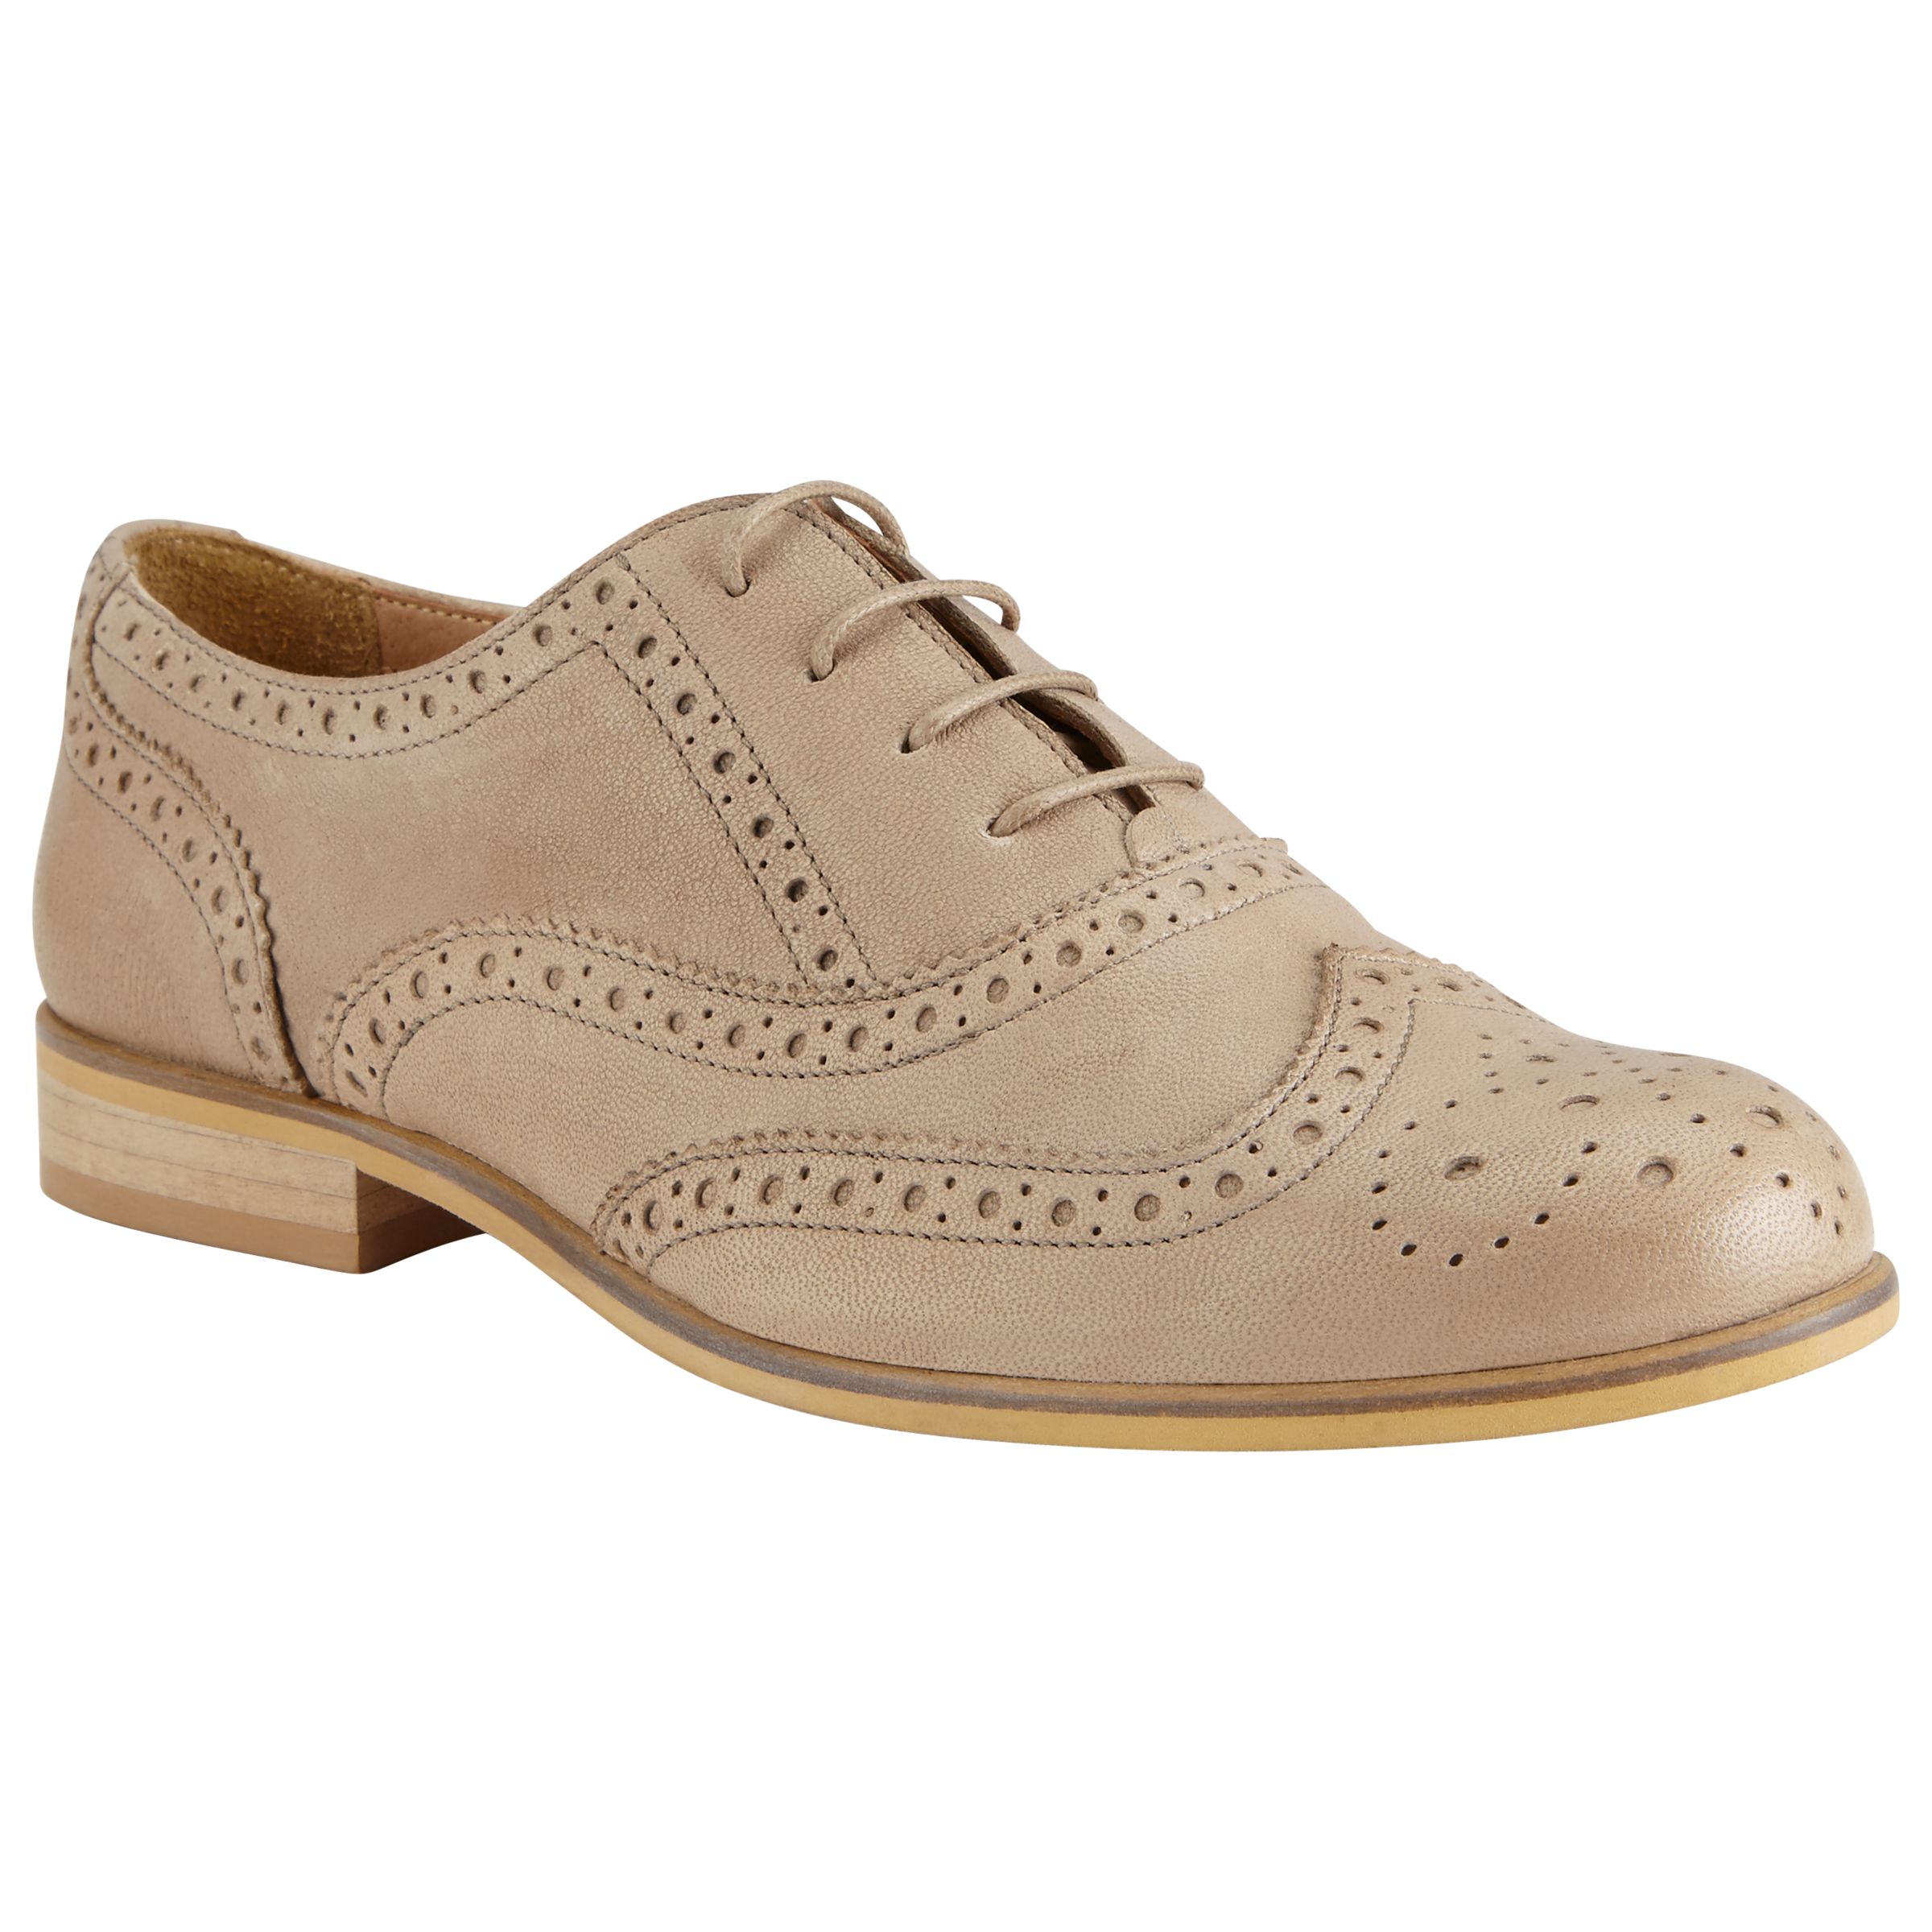 Somerset by Alice Temperley Draycott Leather Brogues at John Lewis ...